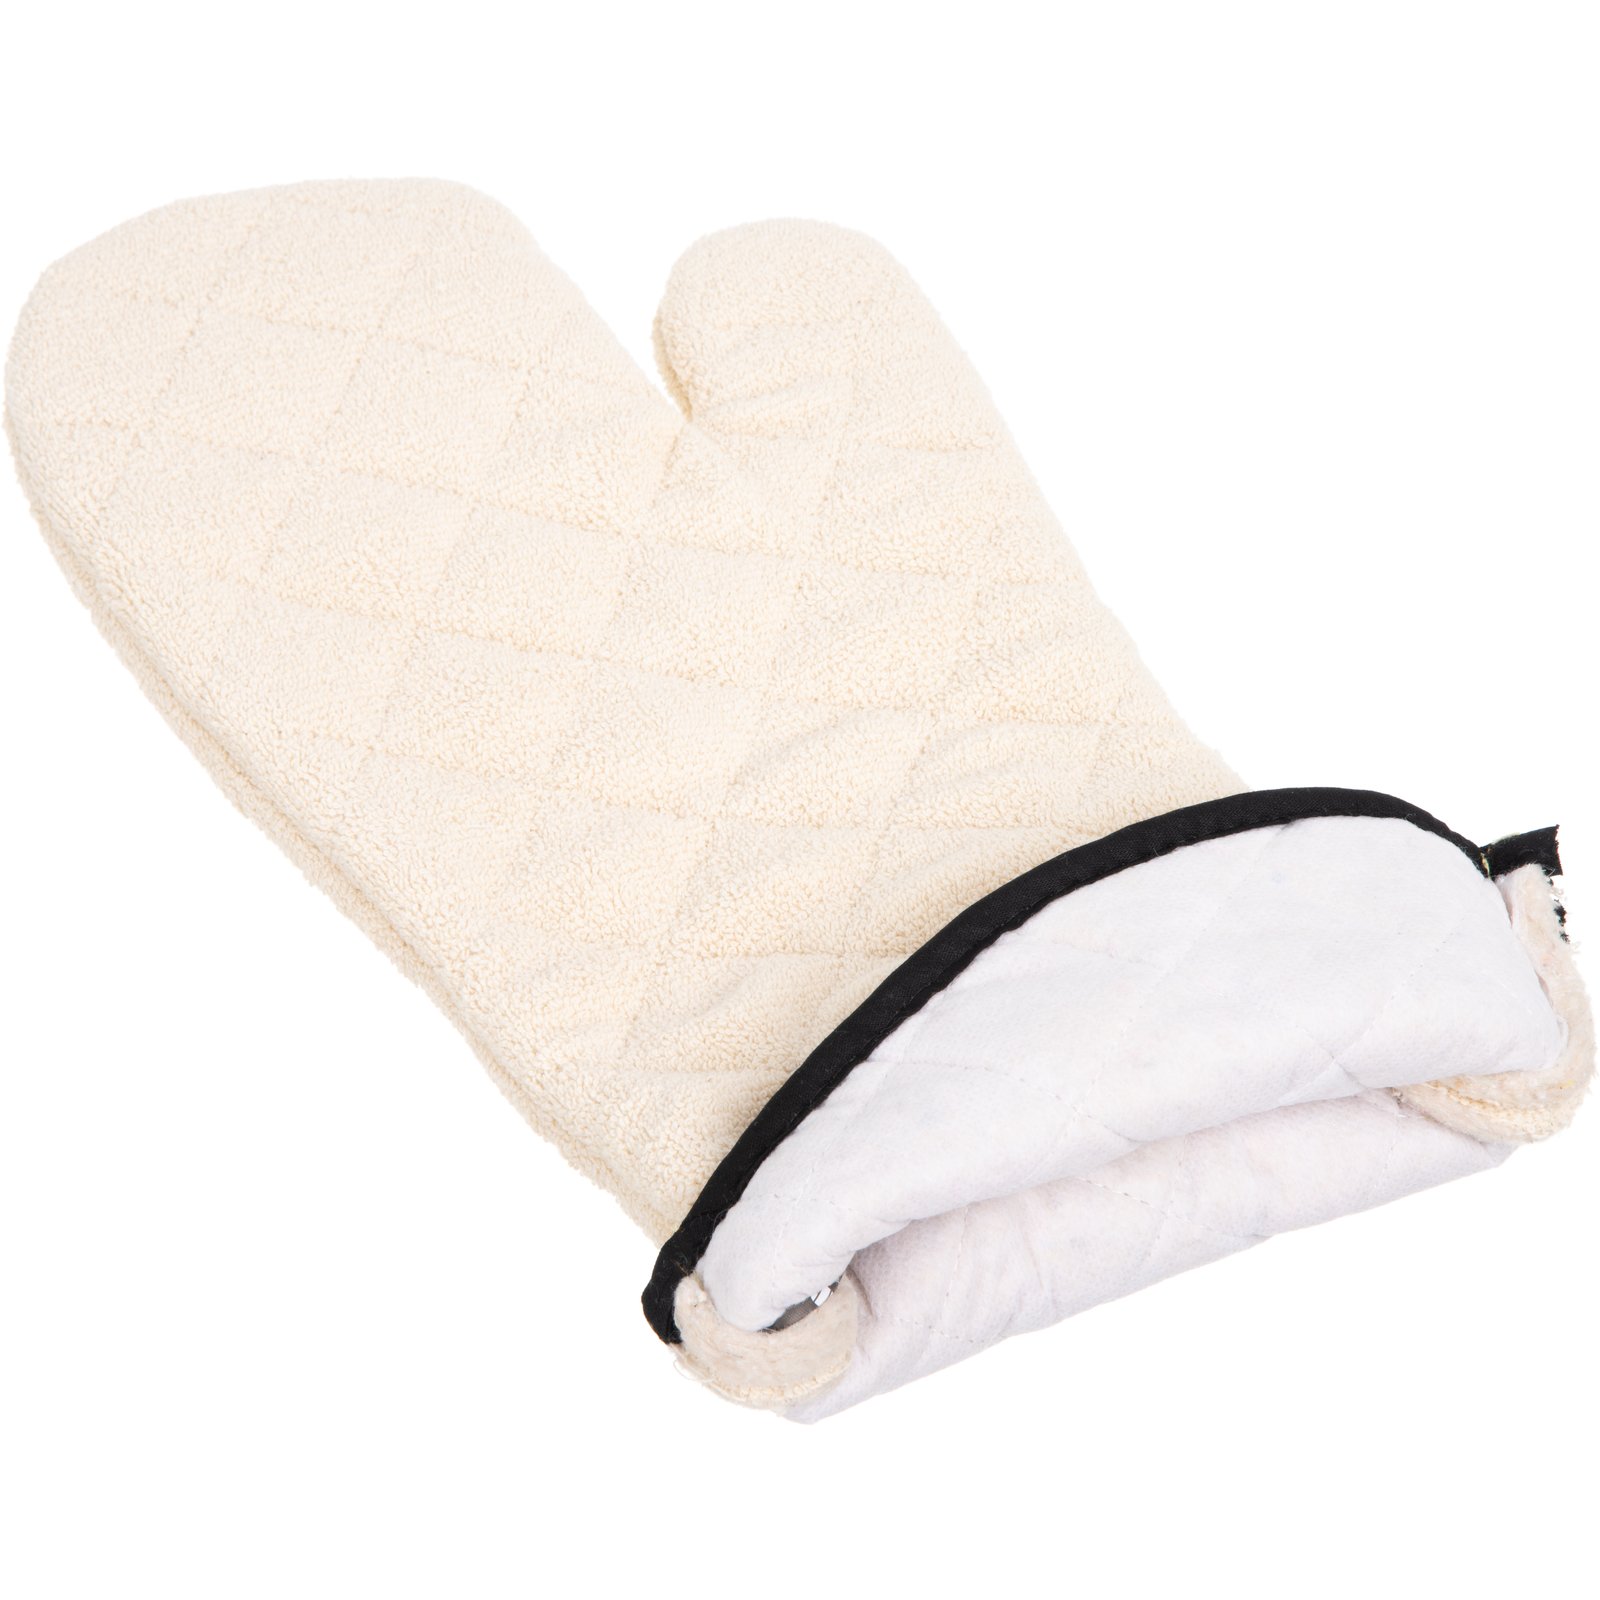 24 Terry Cloth Heat Resistant Oven Mitts, White, Temp Rating 450F